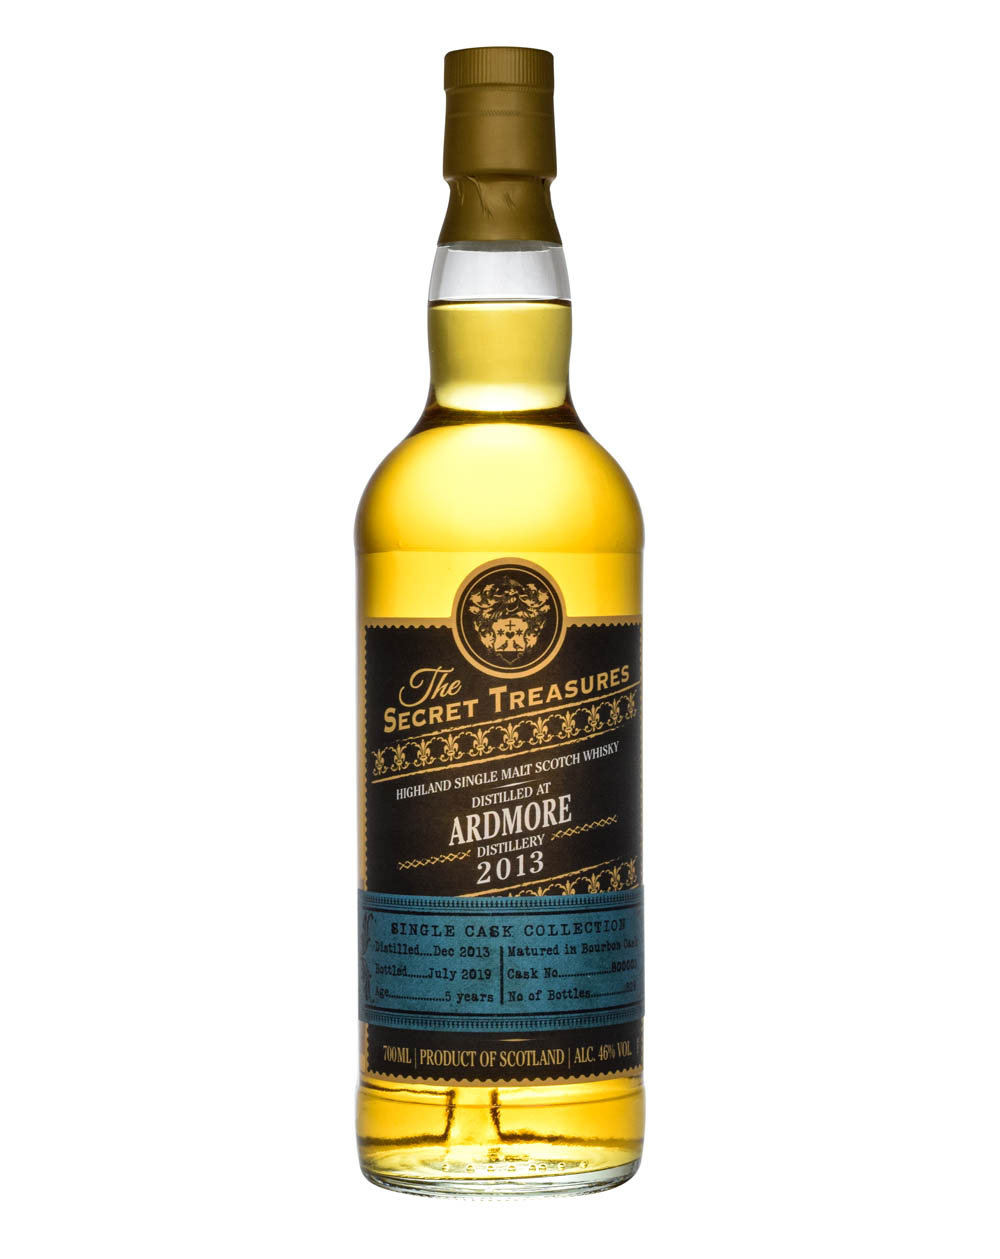 Ardmore 5 Years Old Secrret Treasures 2013 Musthave Malts MHM